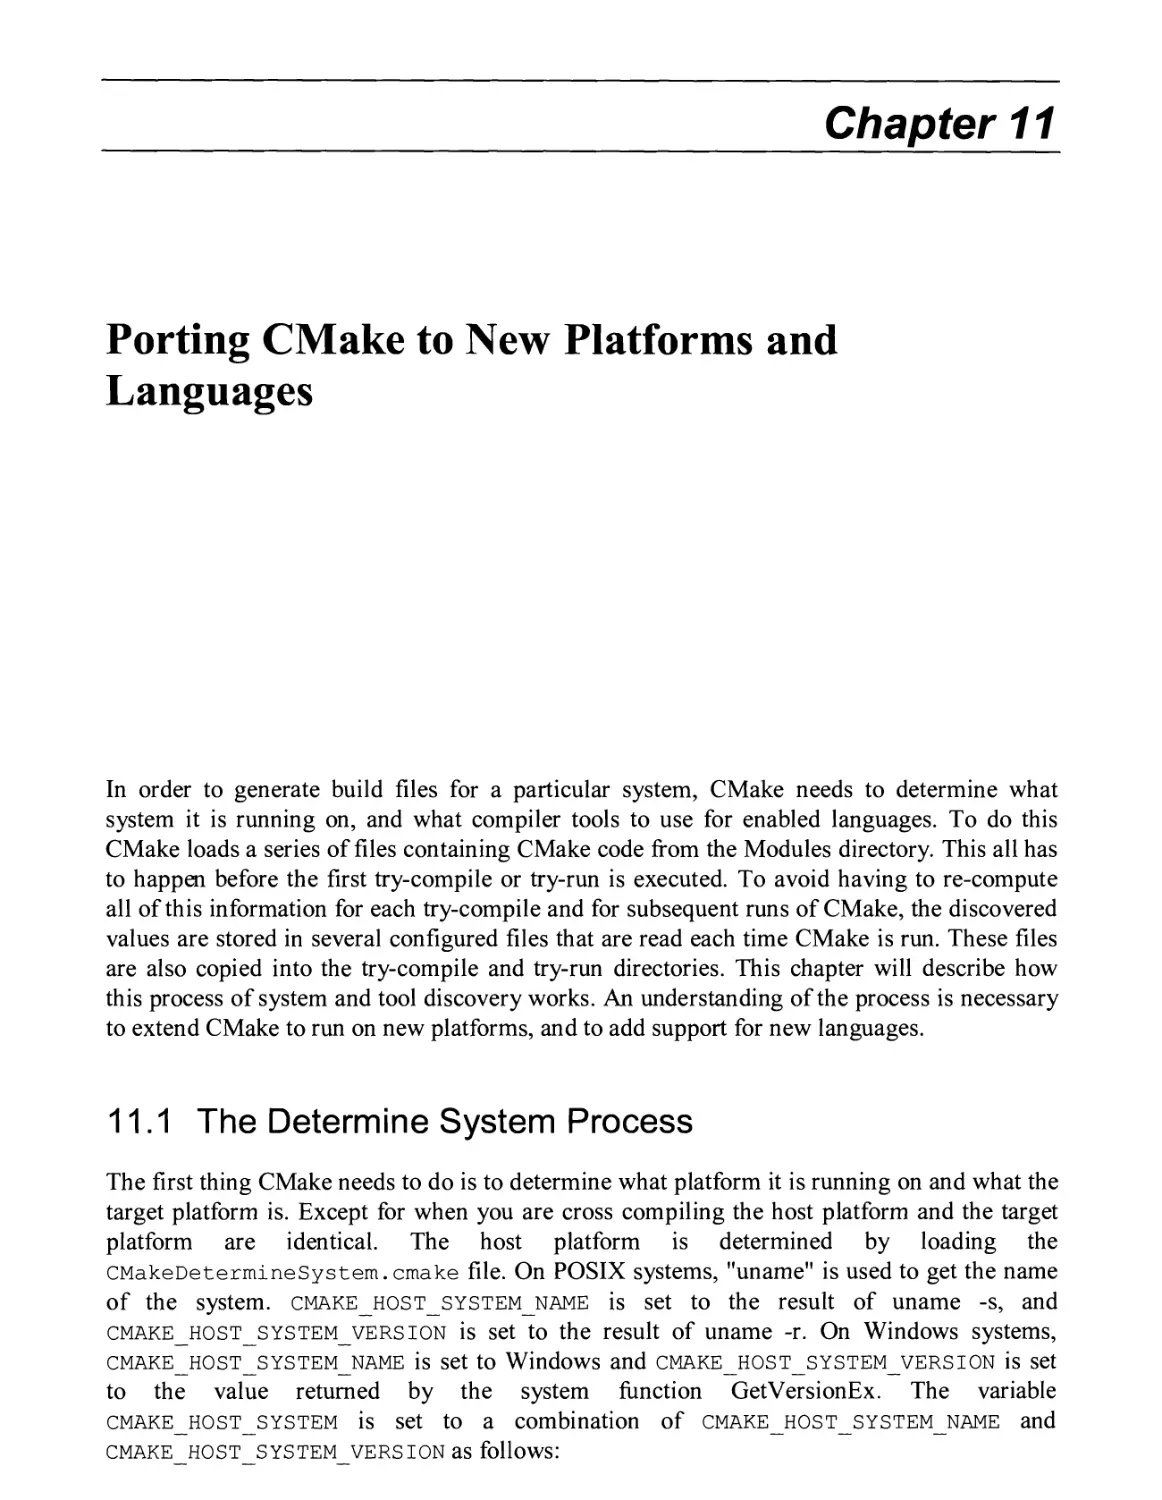 11. PORTING CMAKE TO NEW PLATFORMS AND LANGUAGES